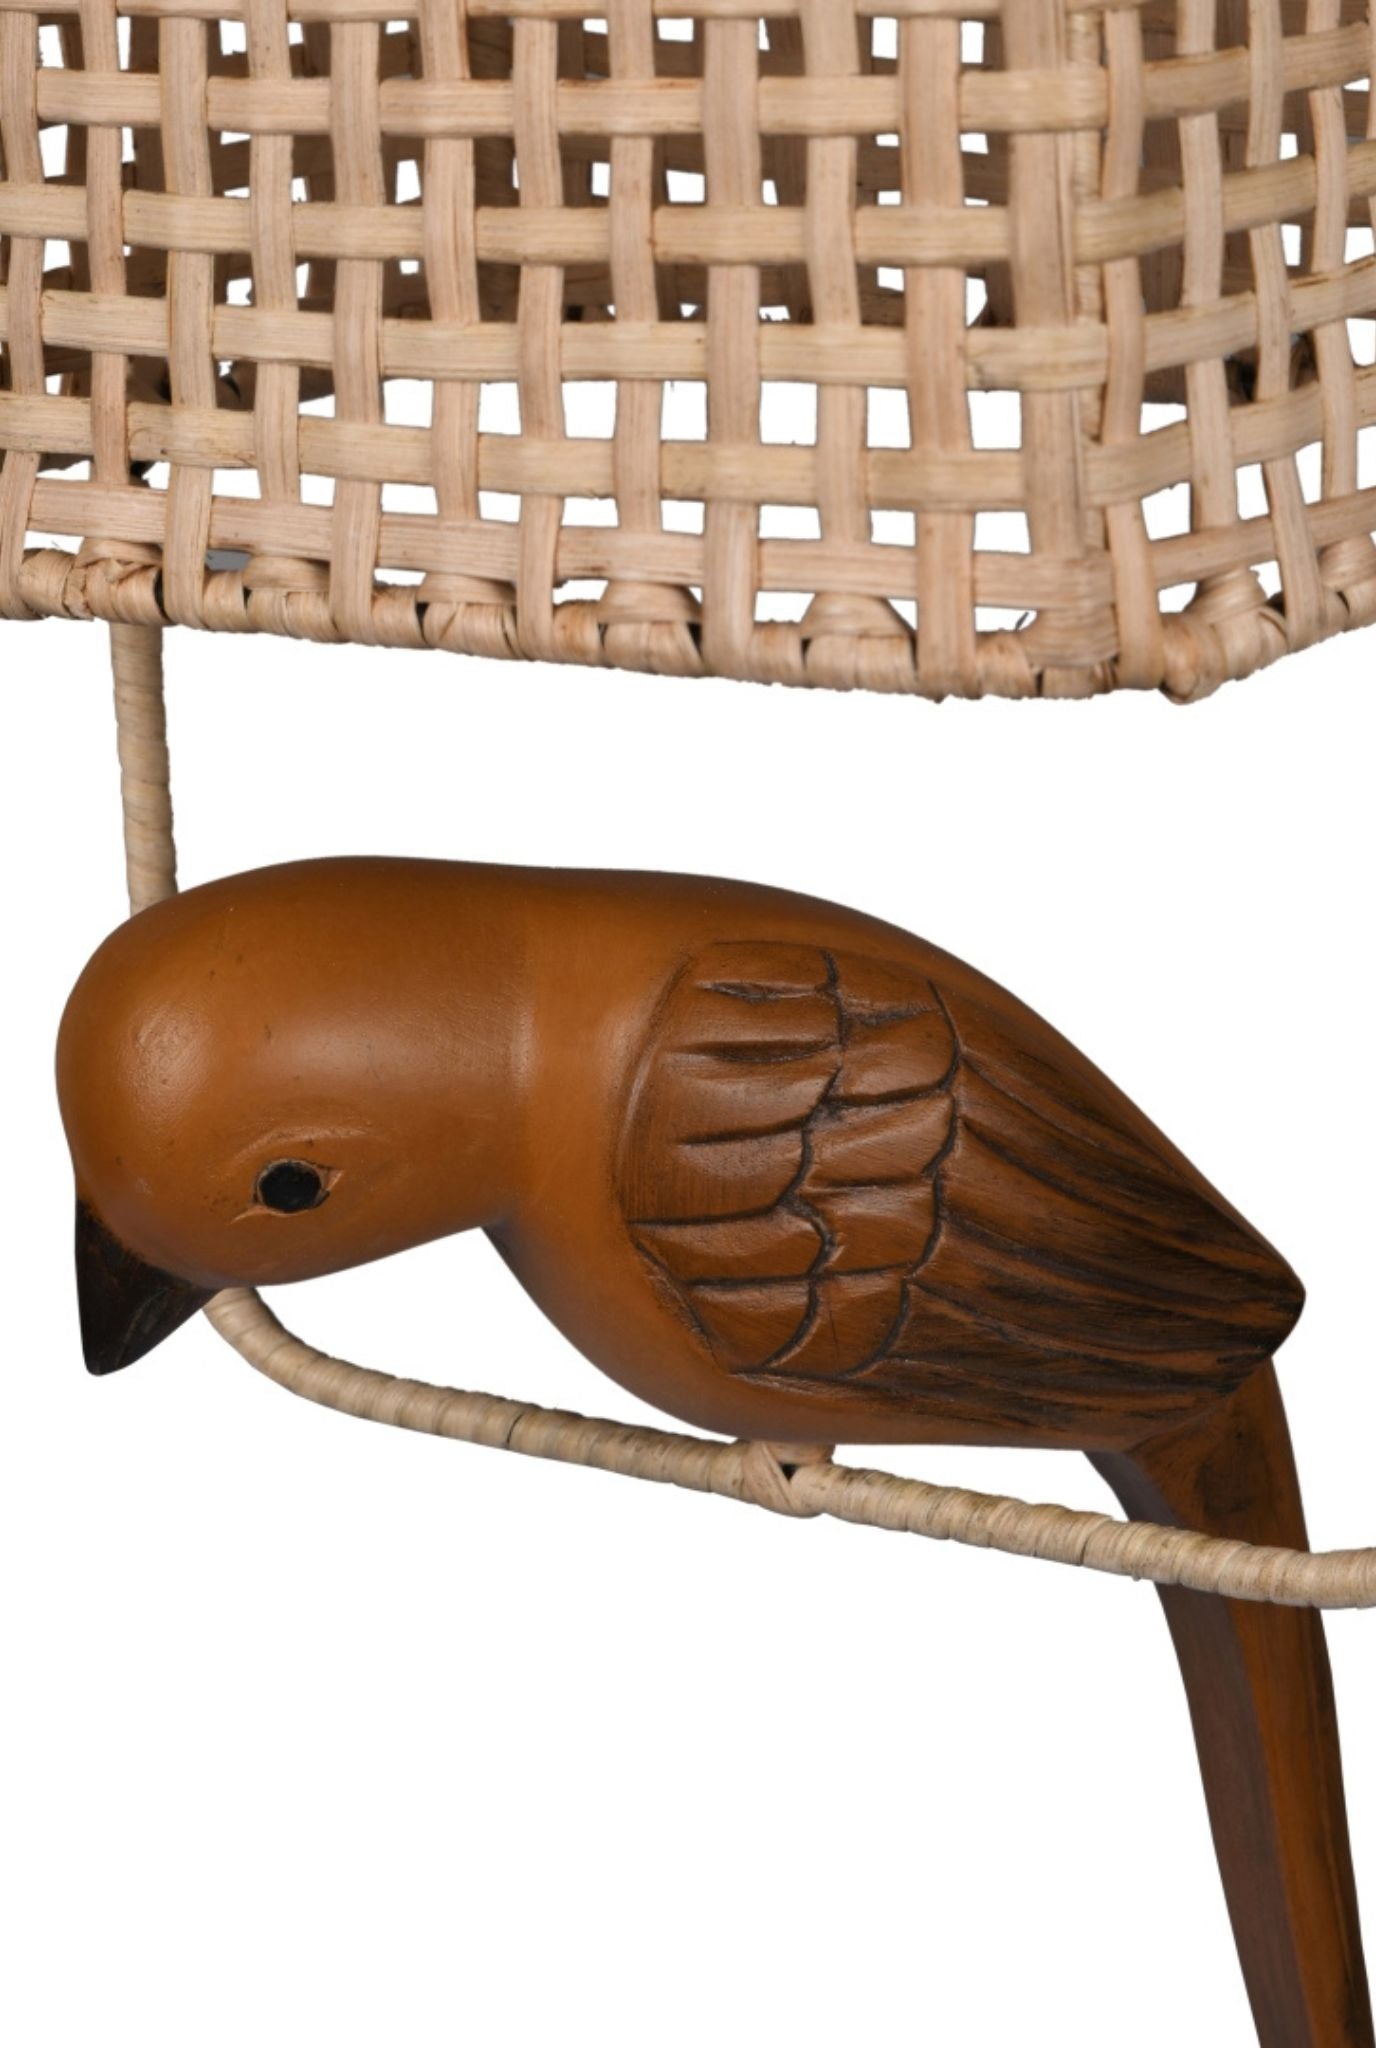 Birdie Cane Pendant Lamp (SHIPPING ONLY IN INDIA)